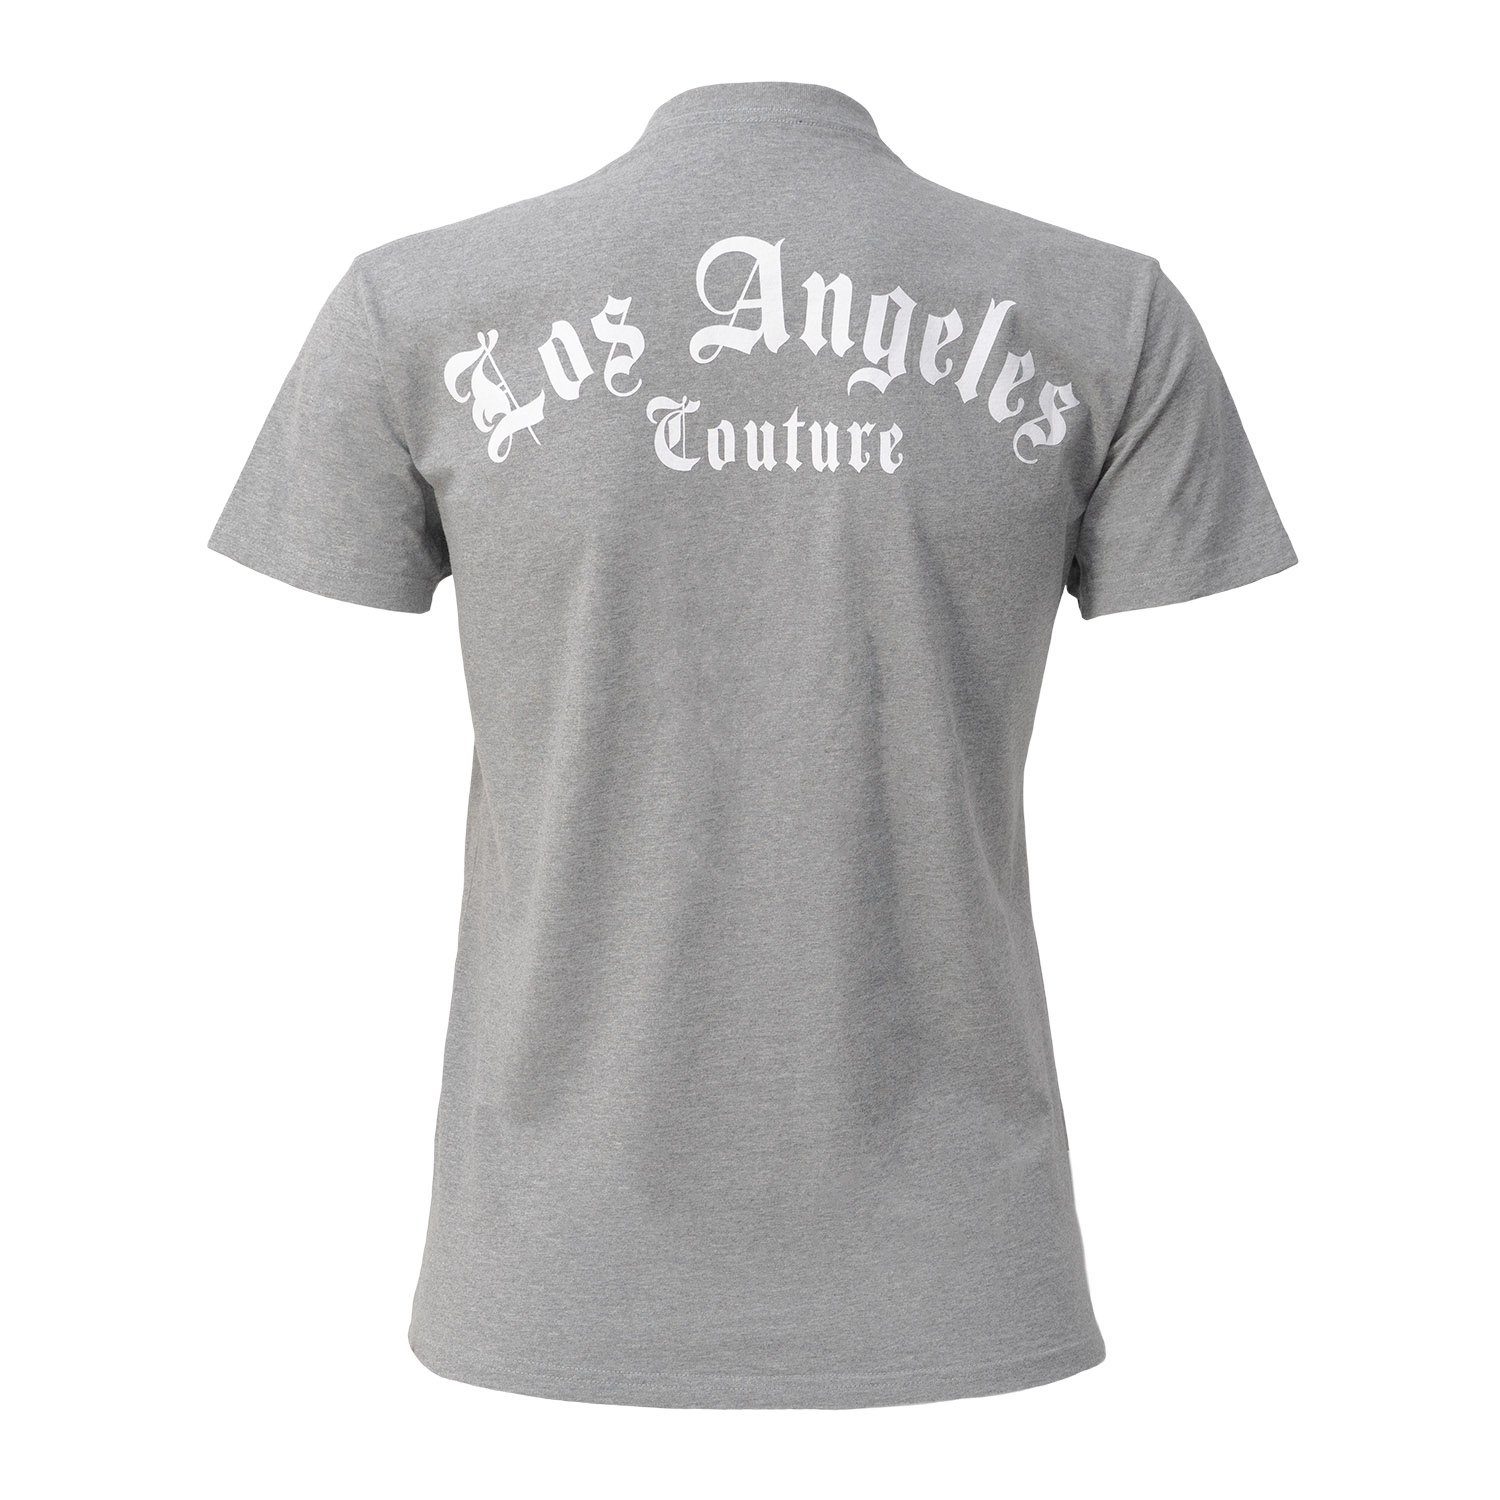 Chiccheria Brand T-Shirt Los in Angeles Angeles, Grau Los Couture Designed